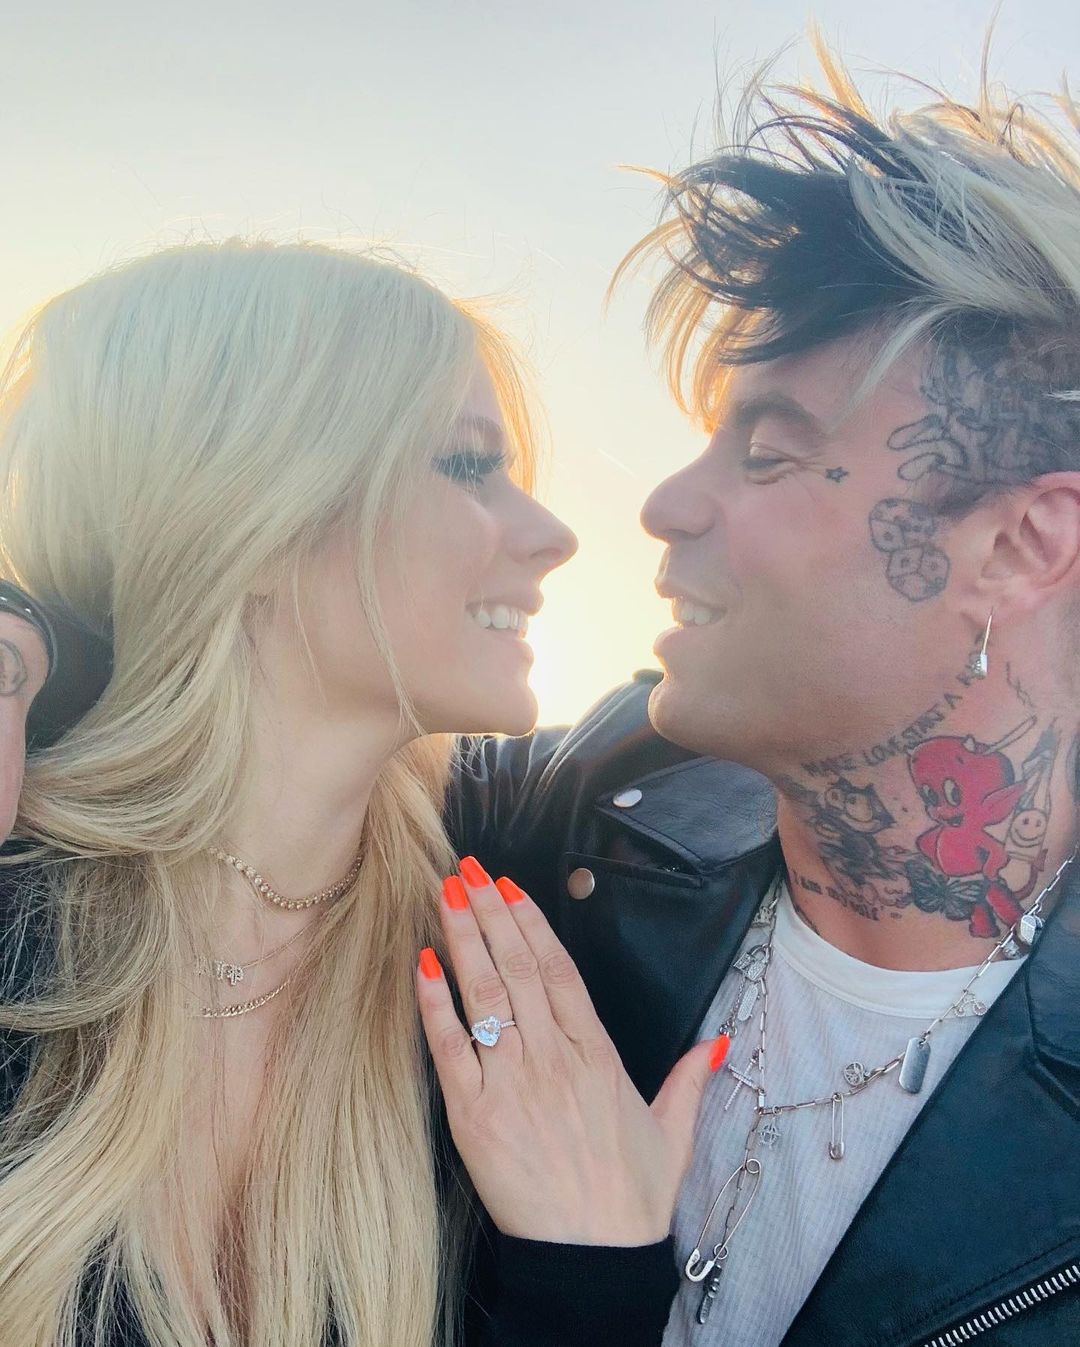 Avril Lavigne and Mod Sun looks into each others as Avril shows her heart-shaped diamond engagement ring.